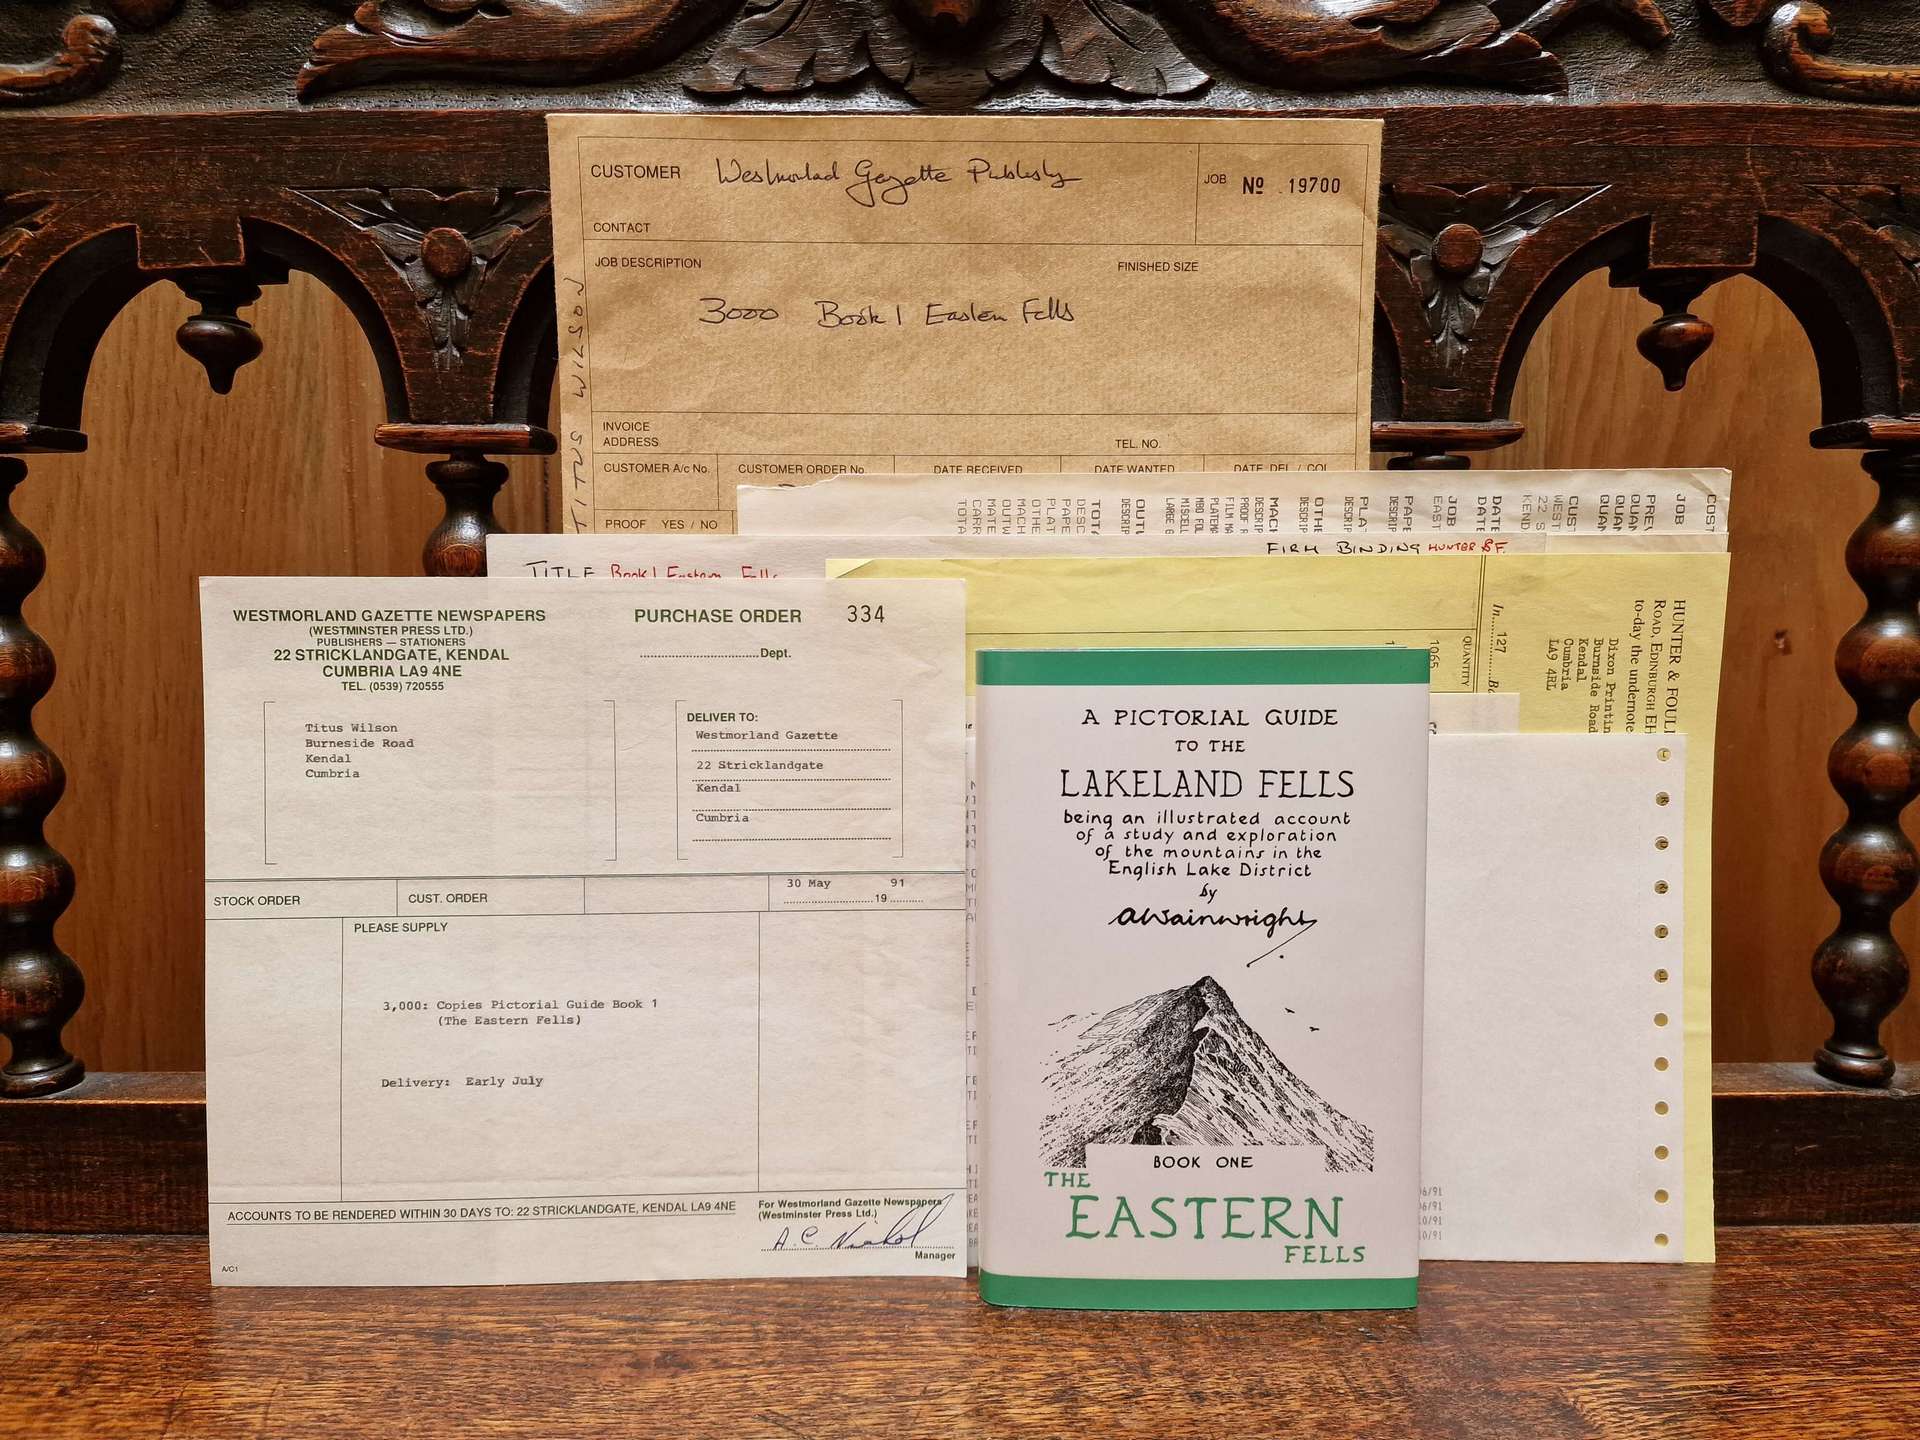 The Eastern Fells Westmorland Gazette Invoices